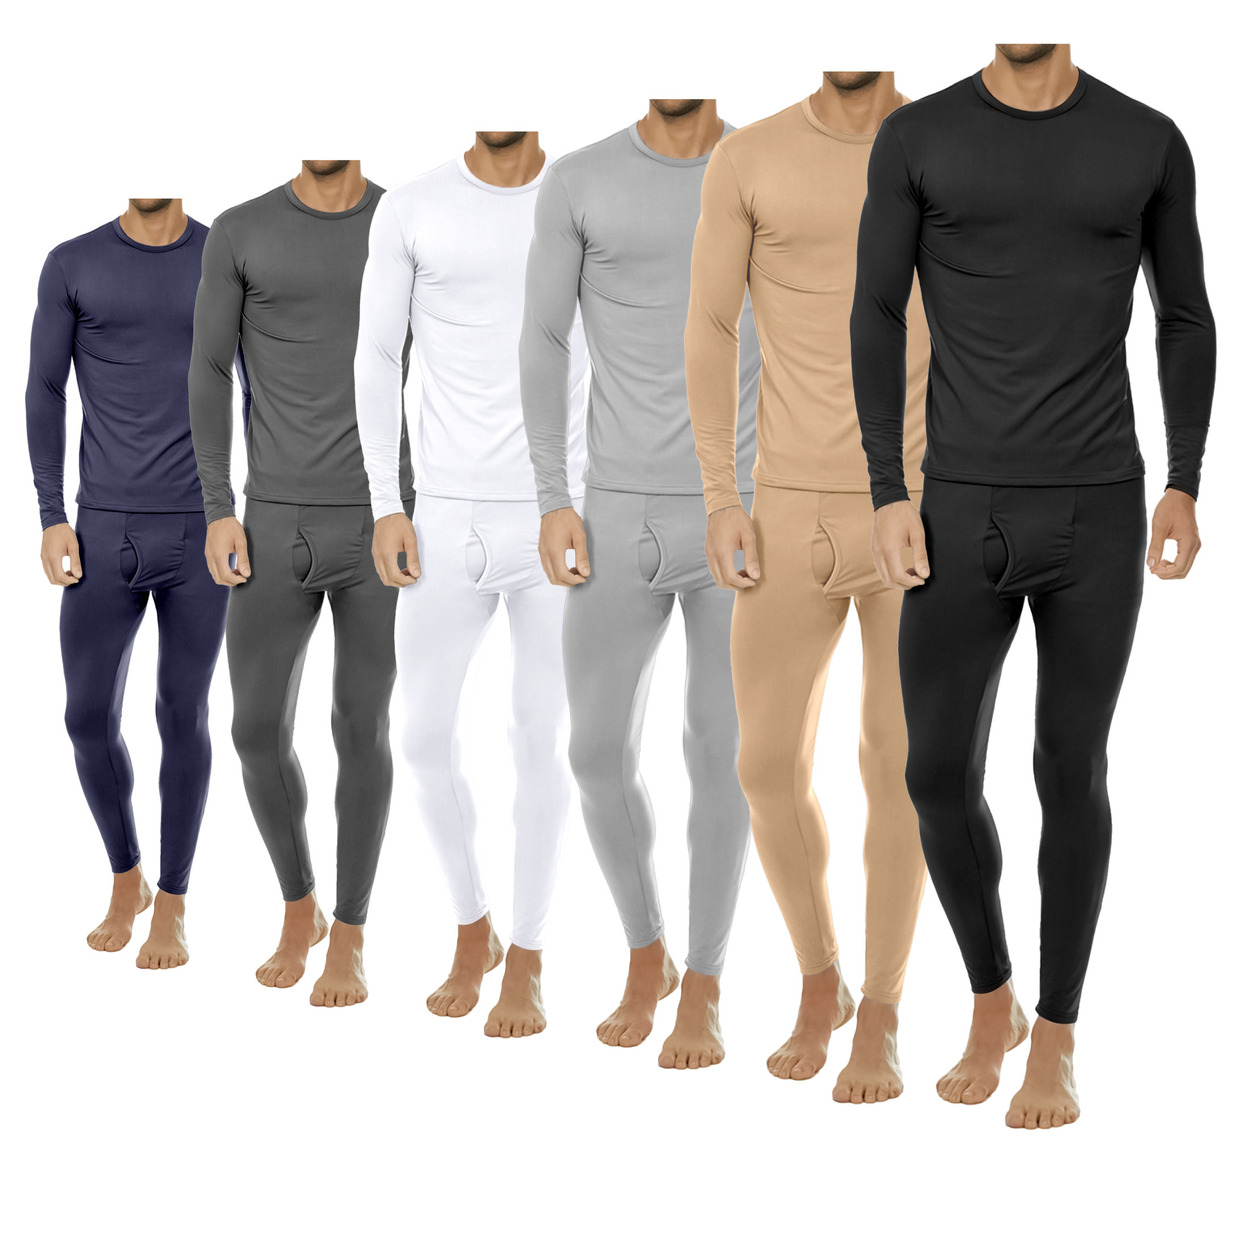 2-Pieces: Men's Winter Warm Fleece Lined Thermal Underwear Set For Cold Weather - White, Large